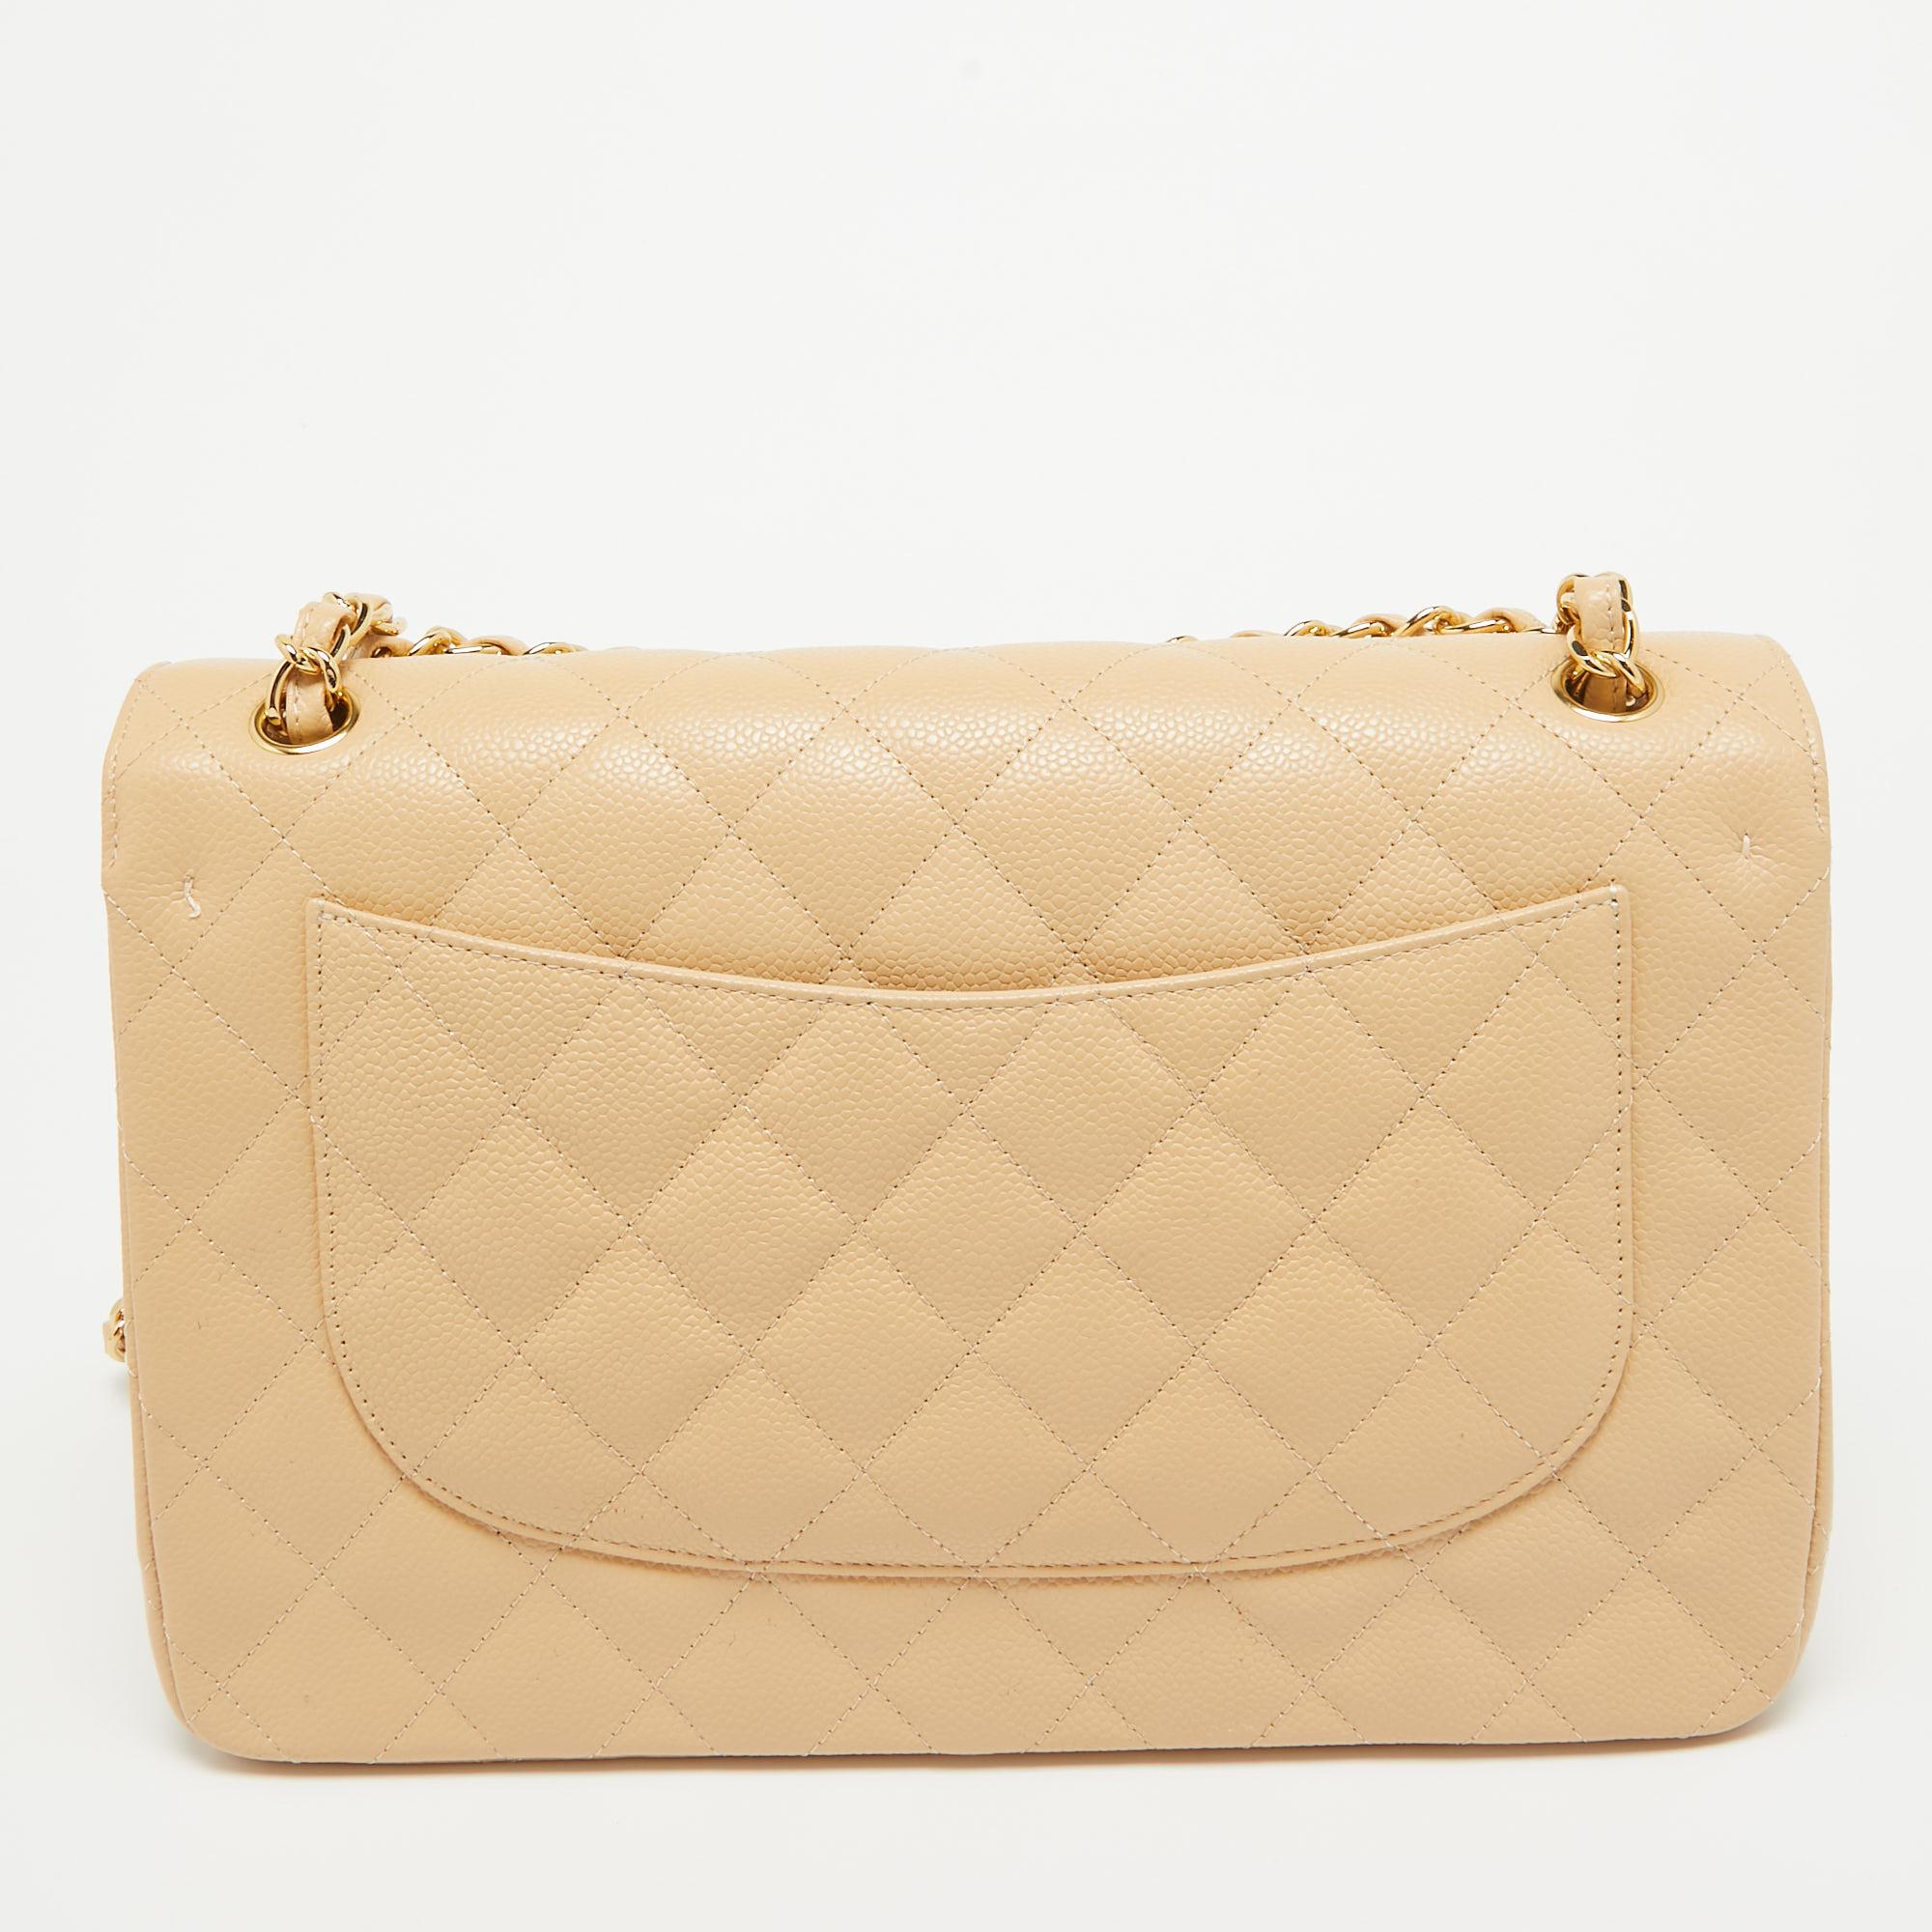 Chanel Beige Quilted Caviar Leather Jumbo Classic Double Flap Bag For Sale 4